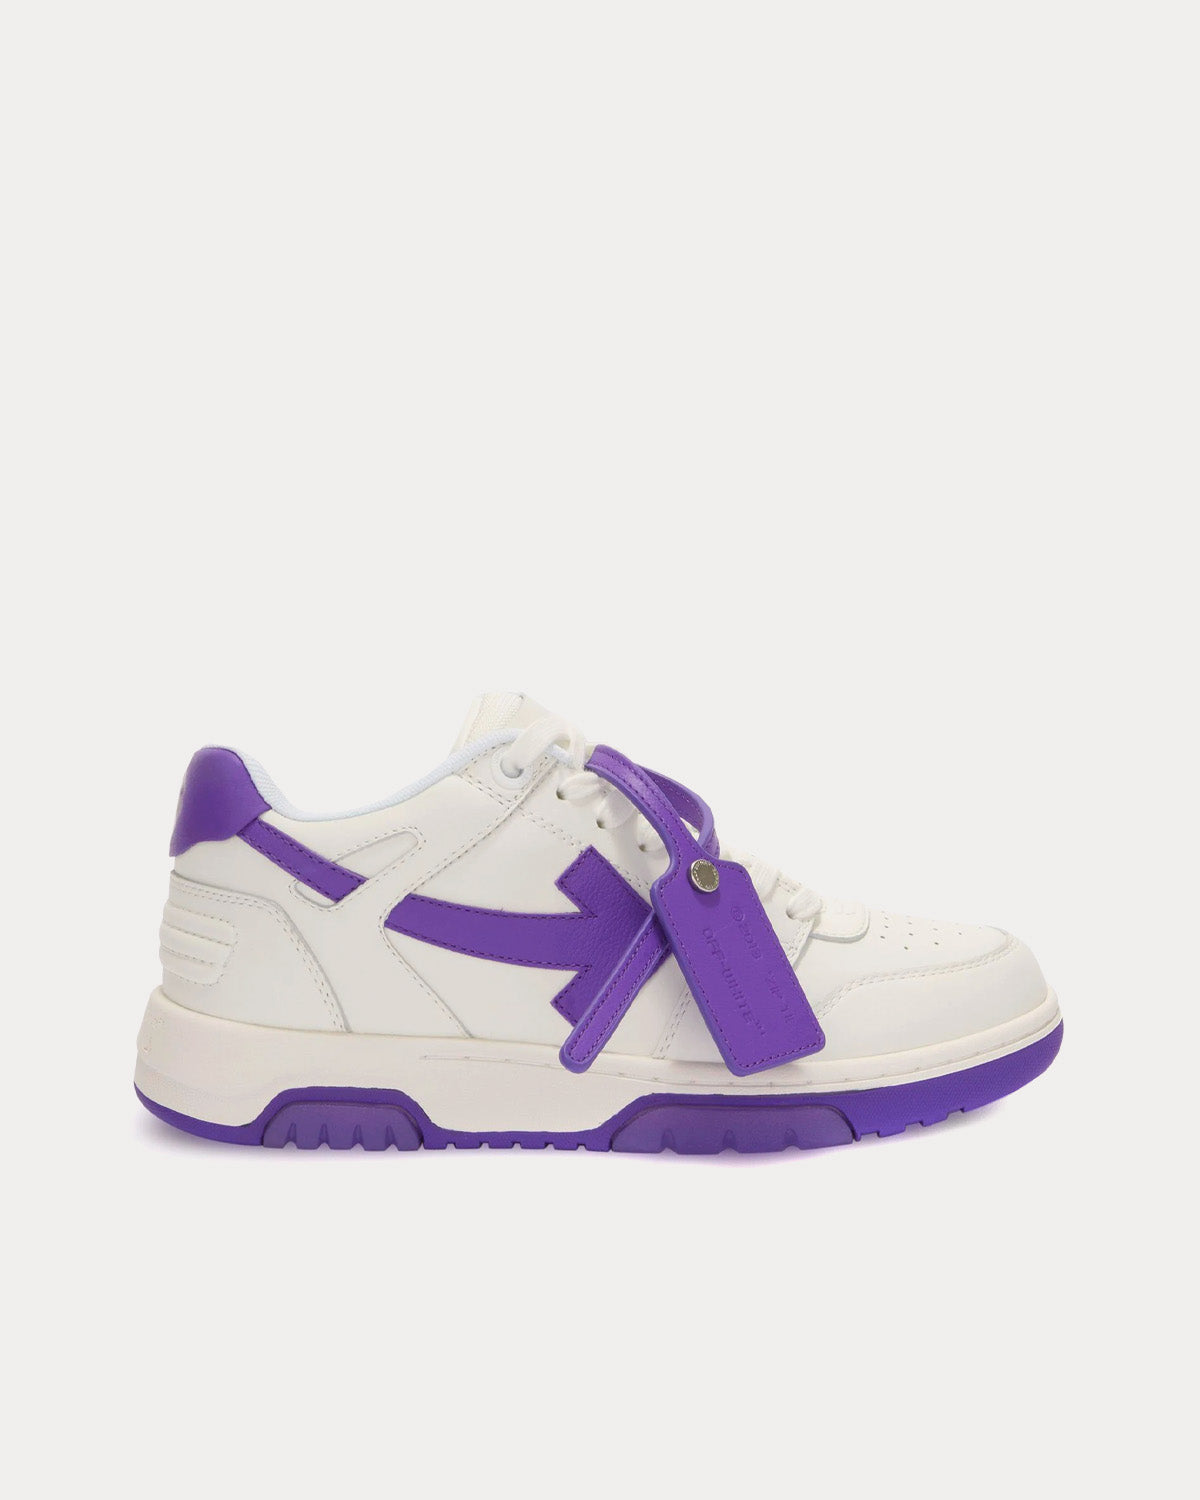 Off-White OUT OF OFFICE CALF LEATHER PURPLE YELLO - PURPLE YELLOW